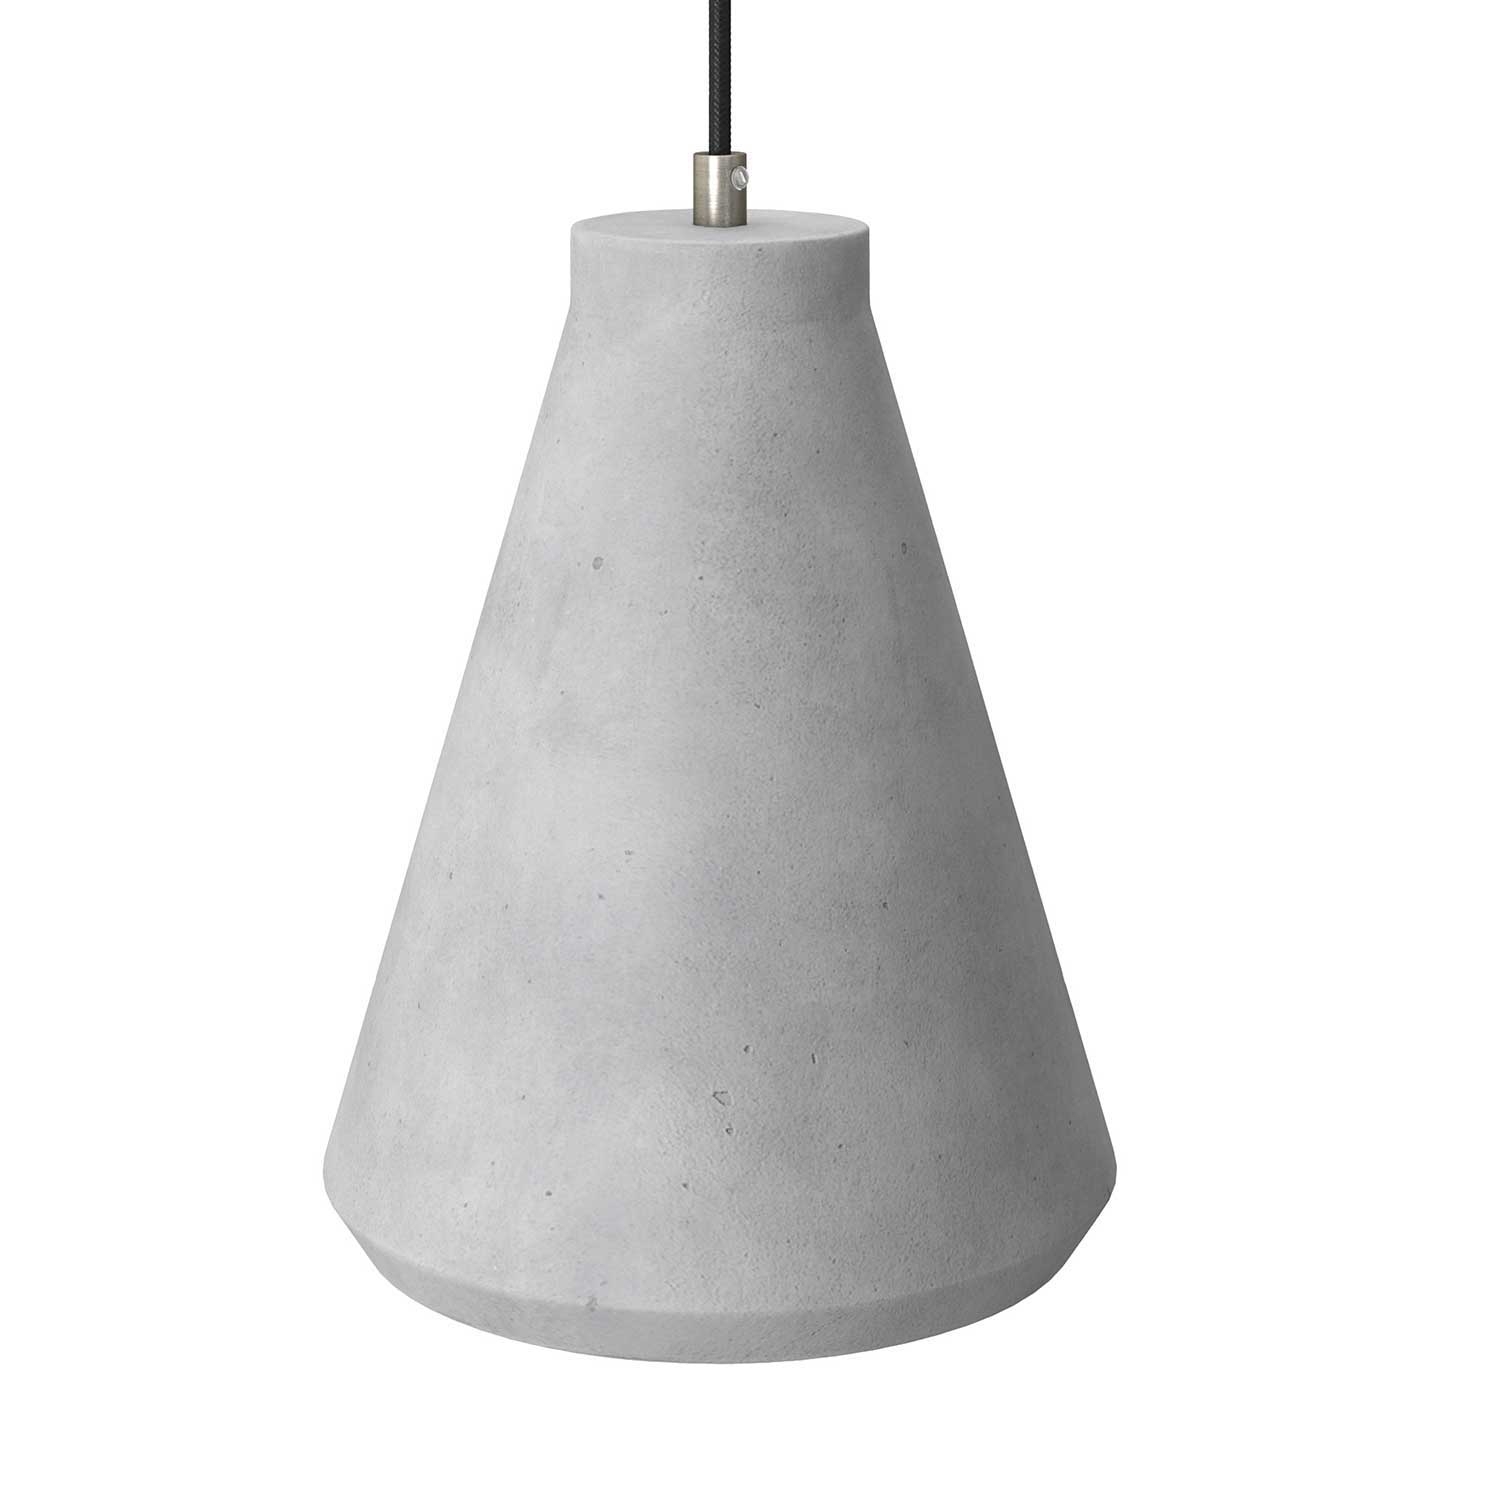 Pendant lamp with textile cable, Funnel cement lampshade and metal details